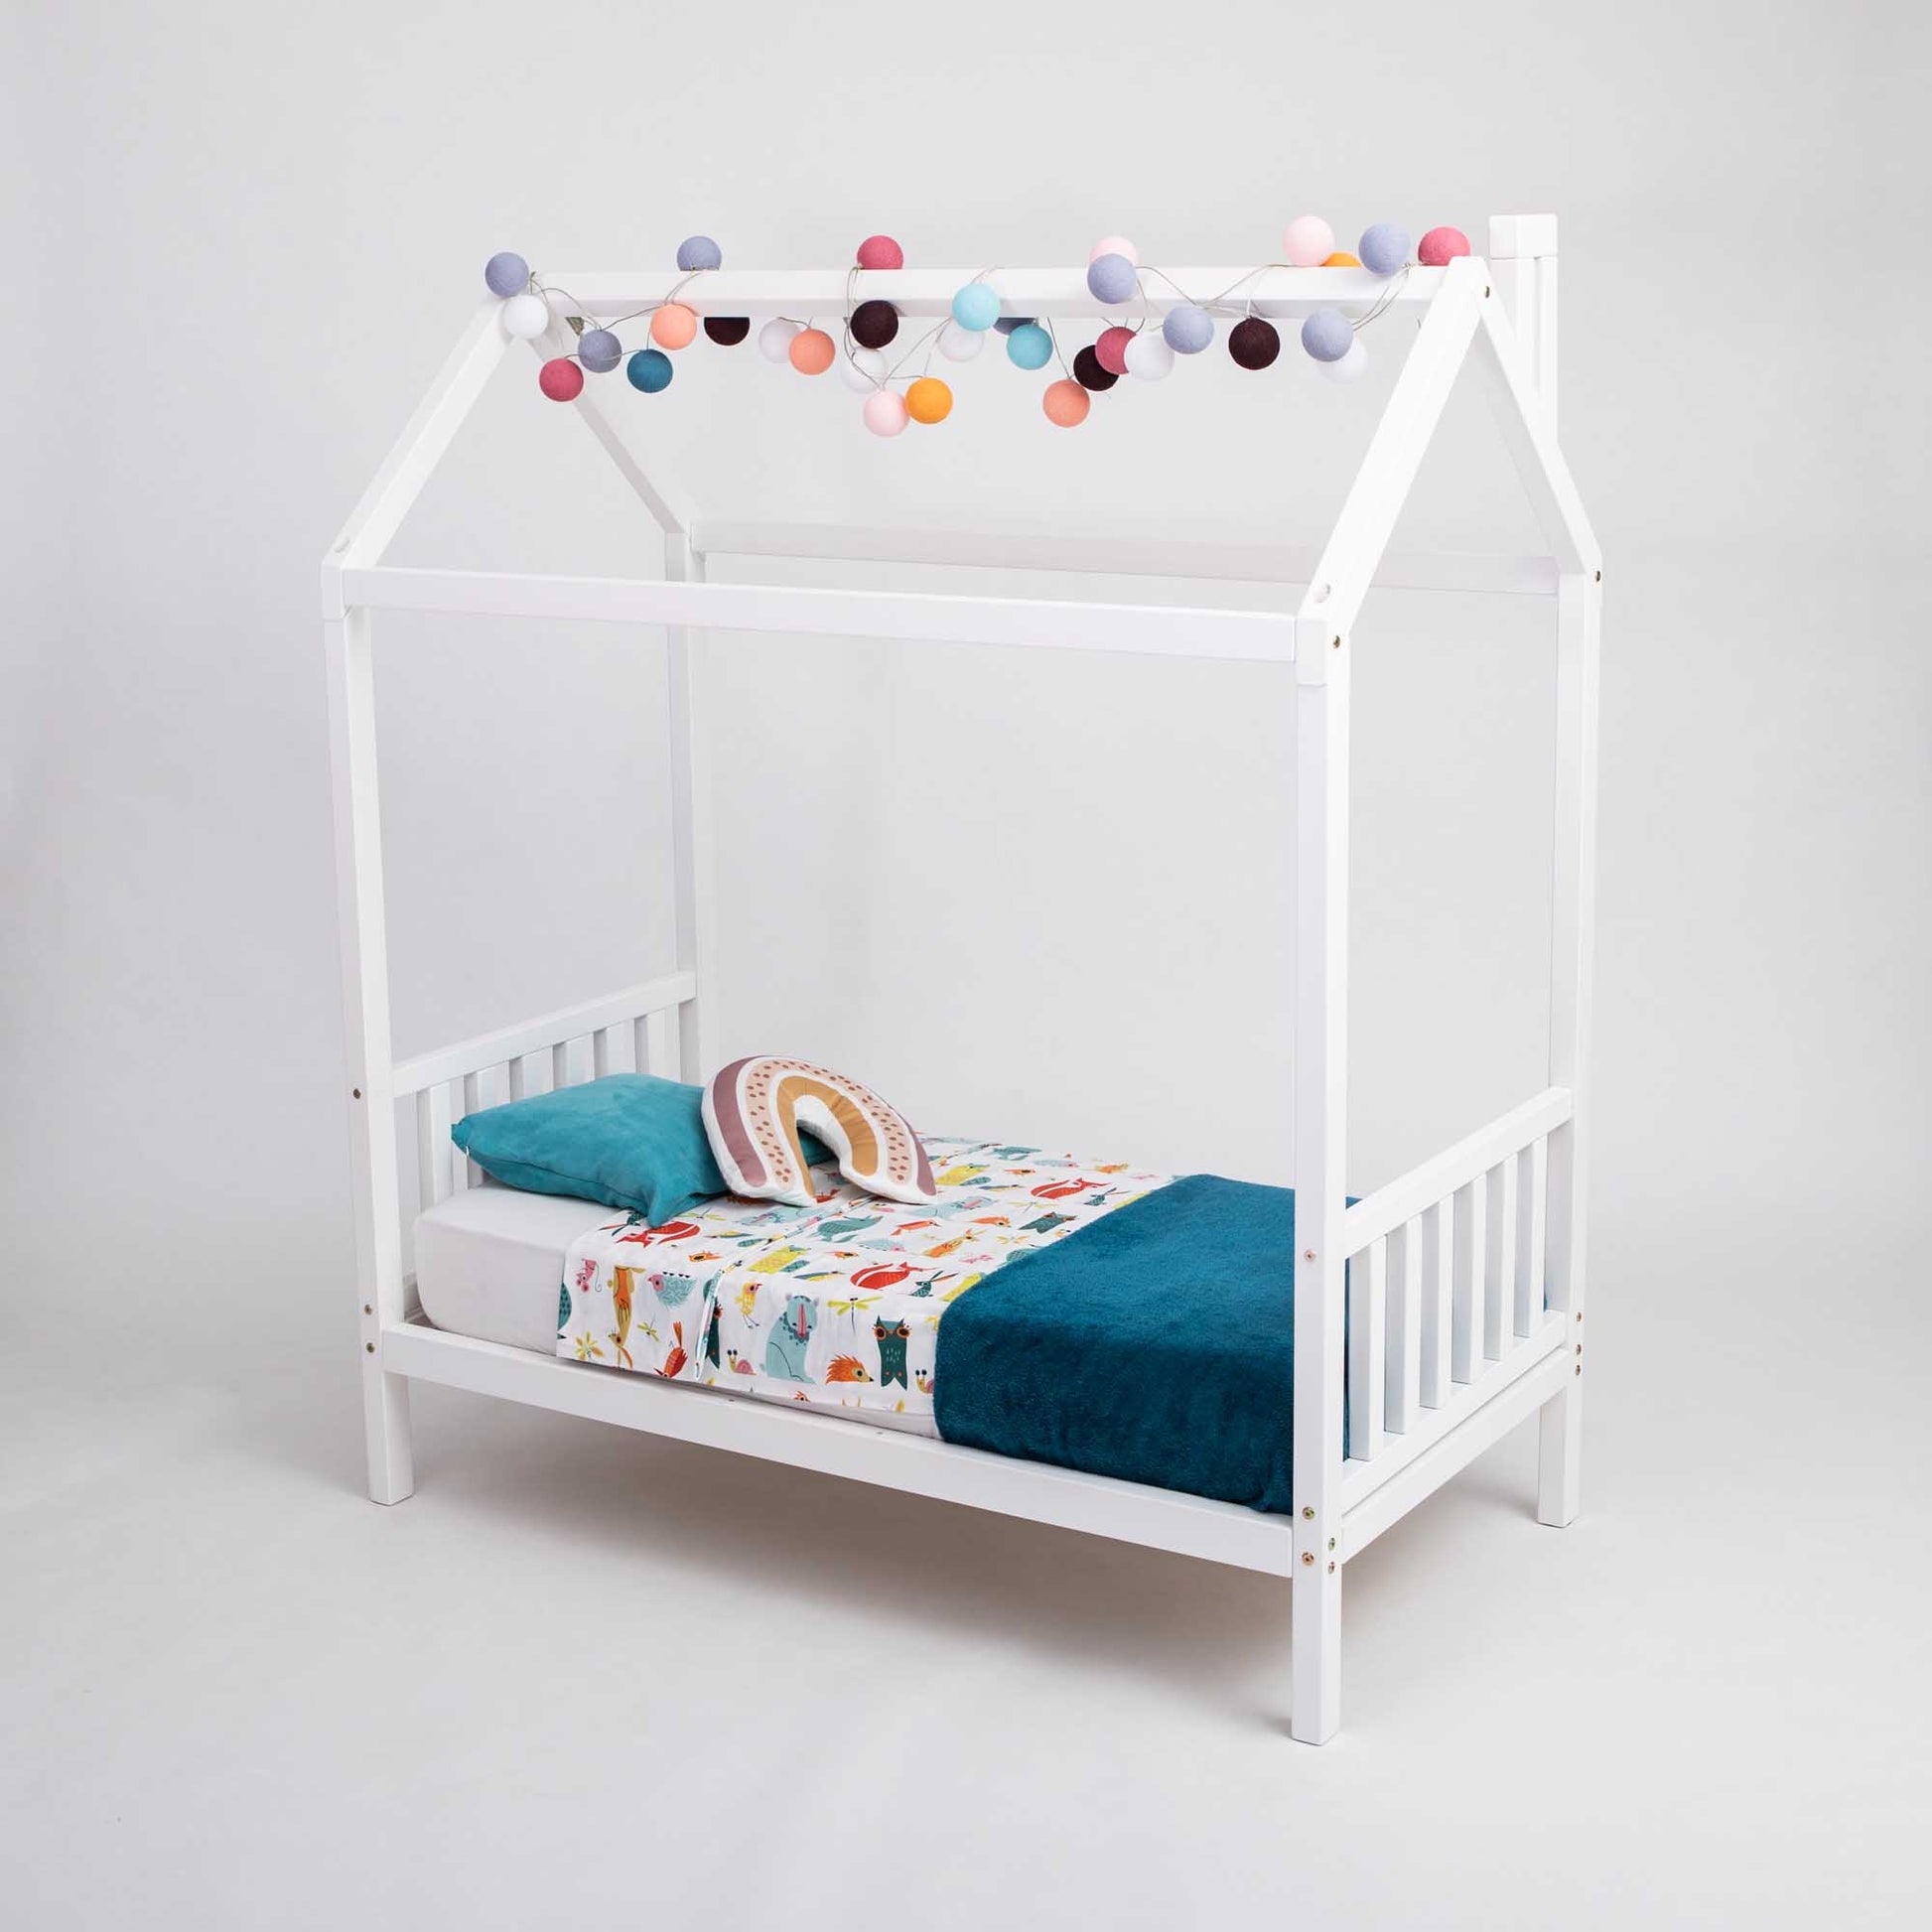 A white toddler house bed on legs with a headboard and footboard, with pom poms hanging from the ceiling.